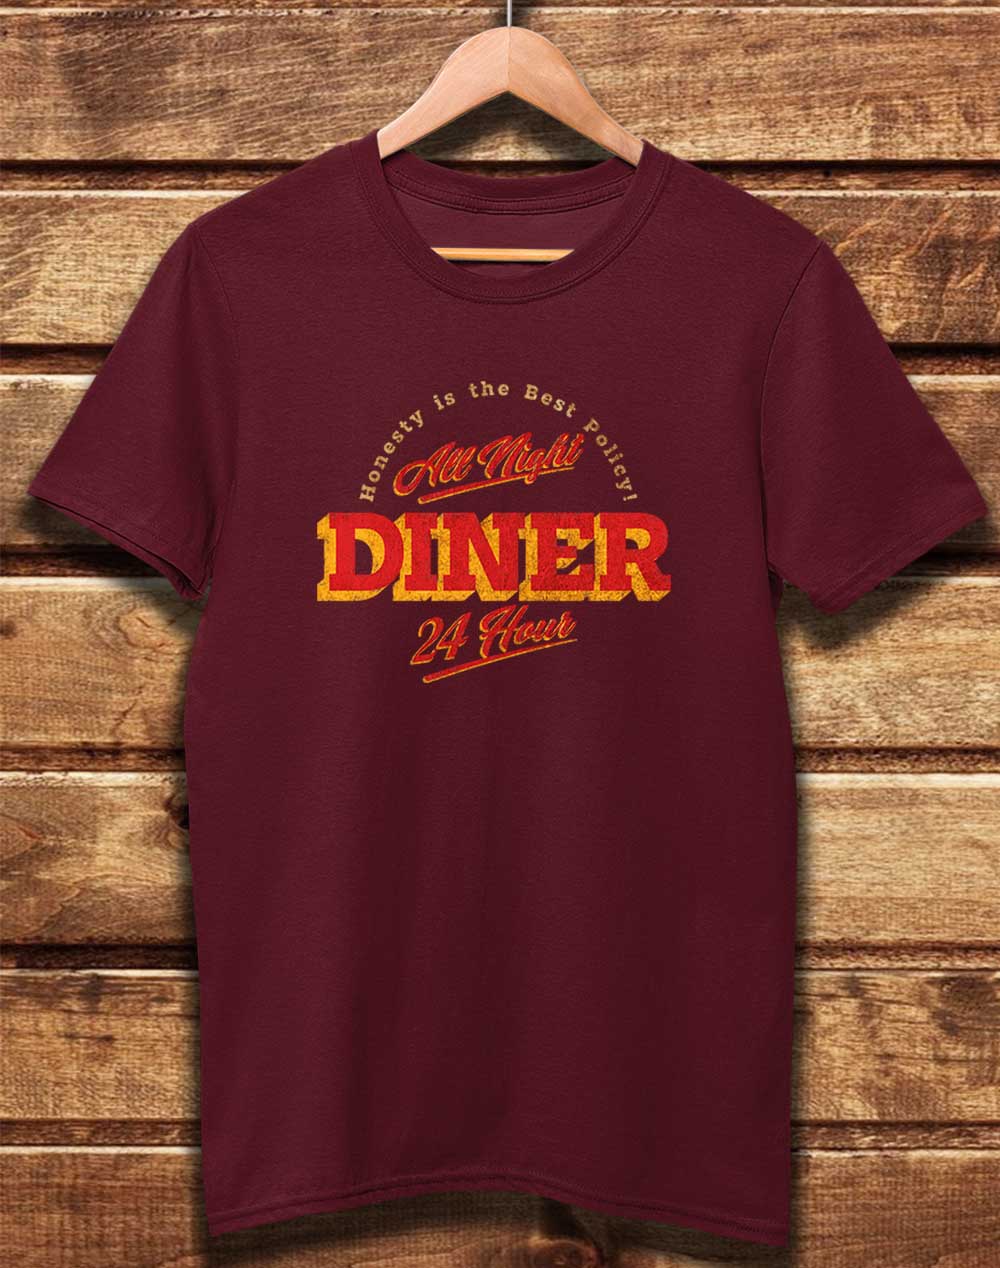 Burgundy - DELUXE 24 Hour Diner Organic Cotton T-Shirt